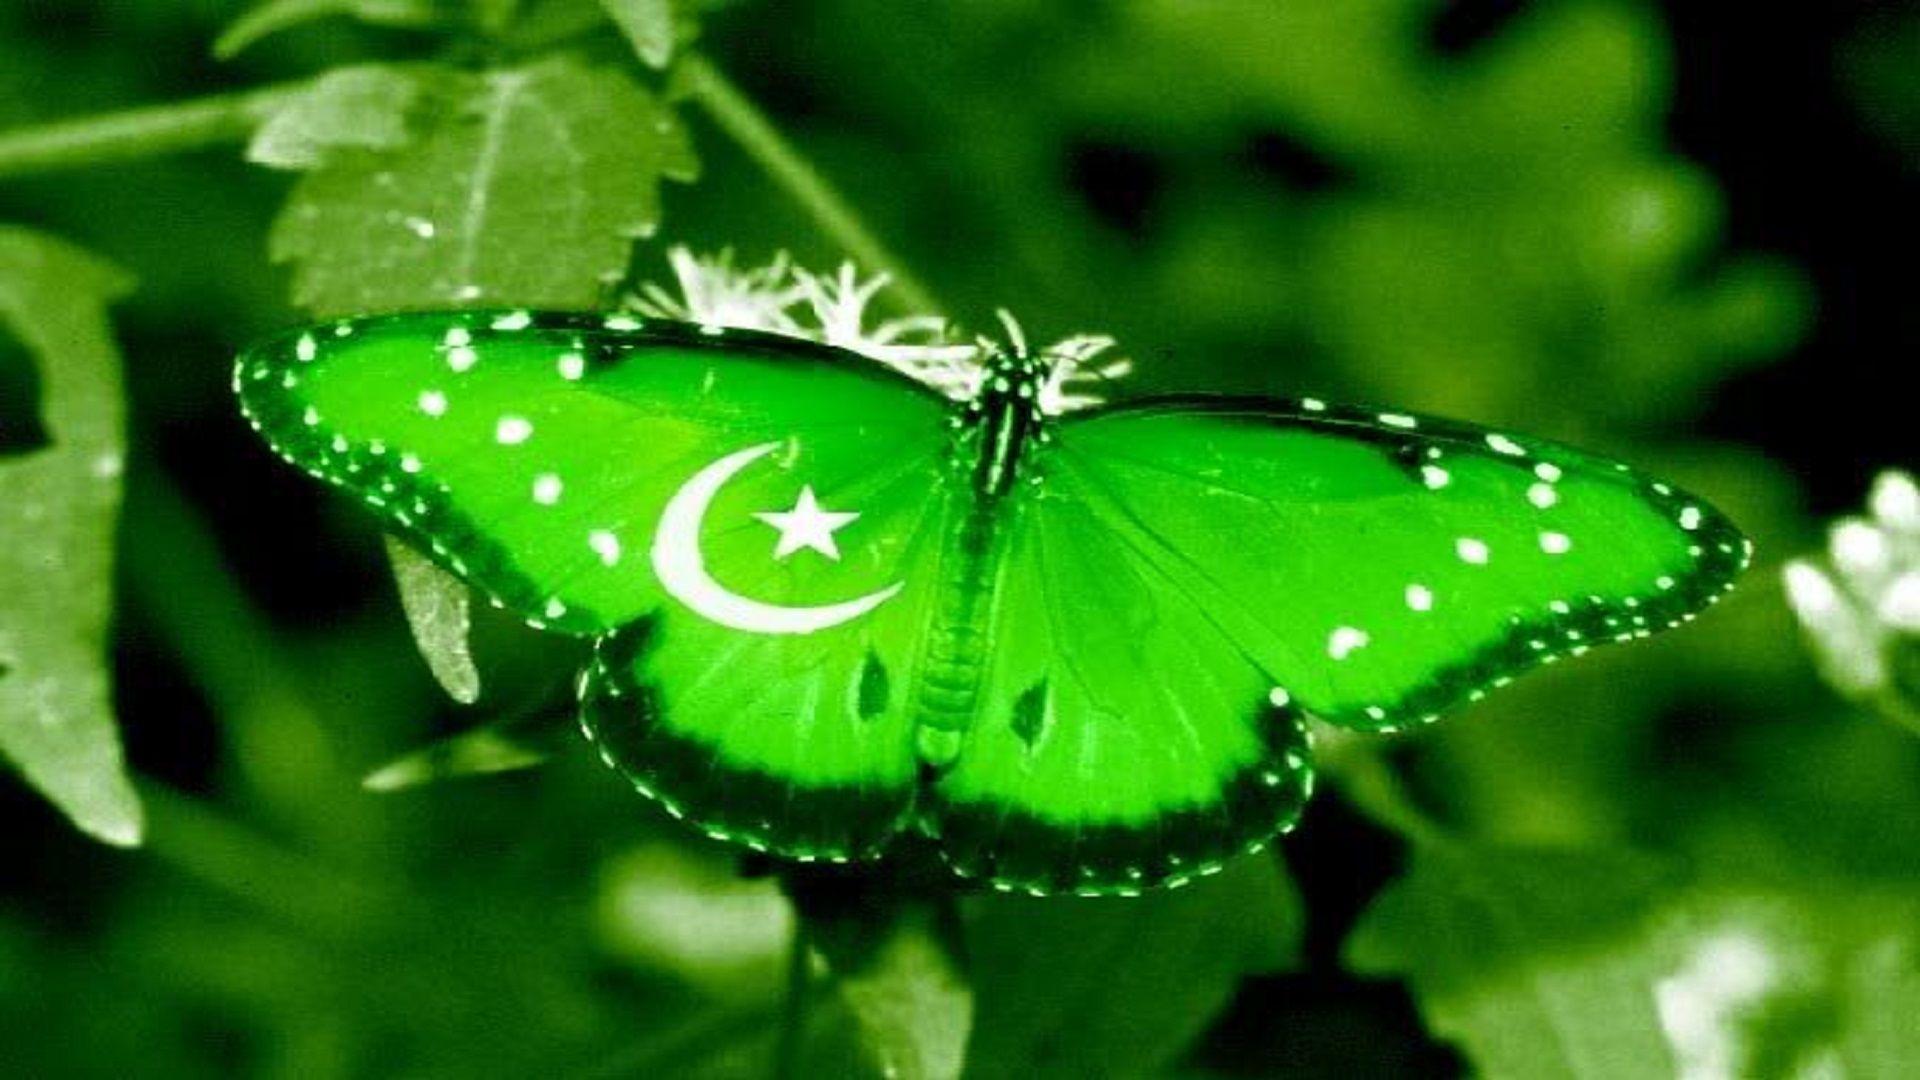 Pakistani Flag Wallpaper For Mobile Phones, Picture